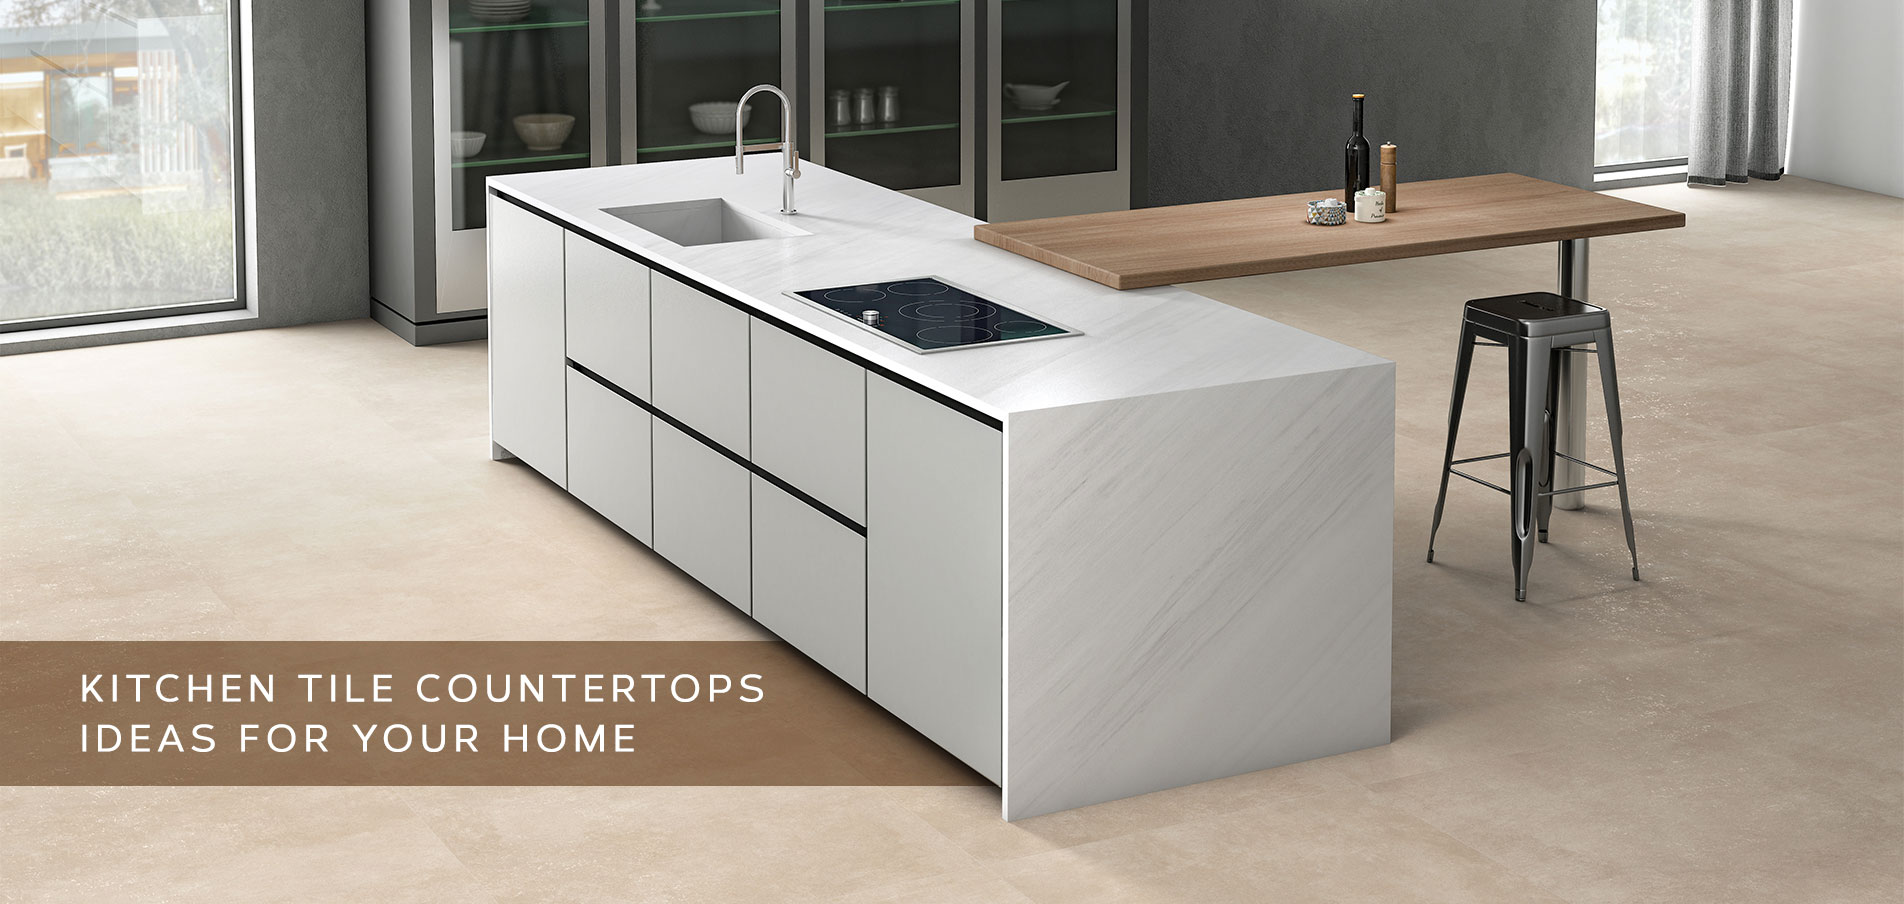 Upgrade Your Countertops with Trendsetting Countertop Tiles